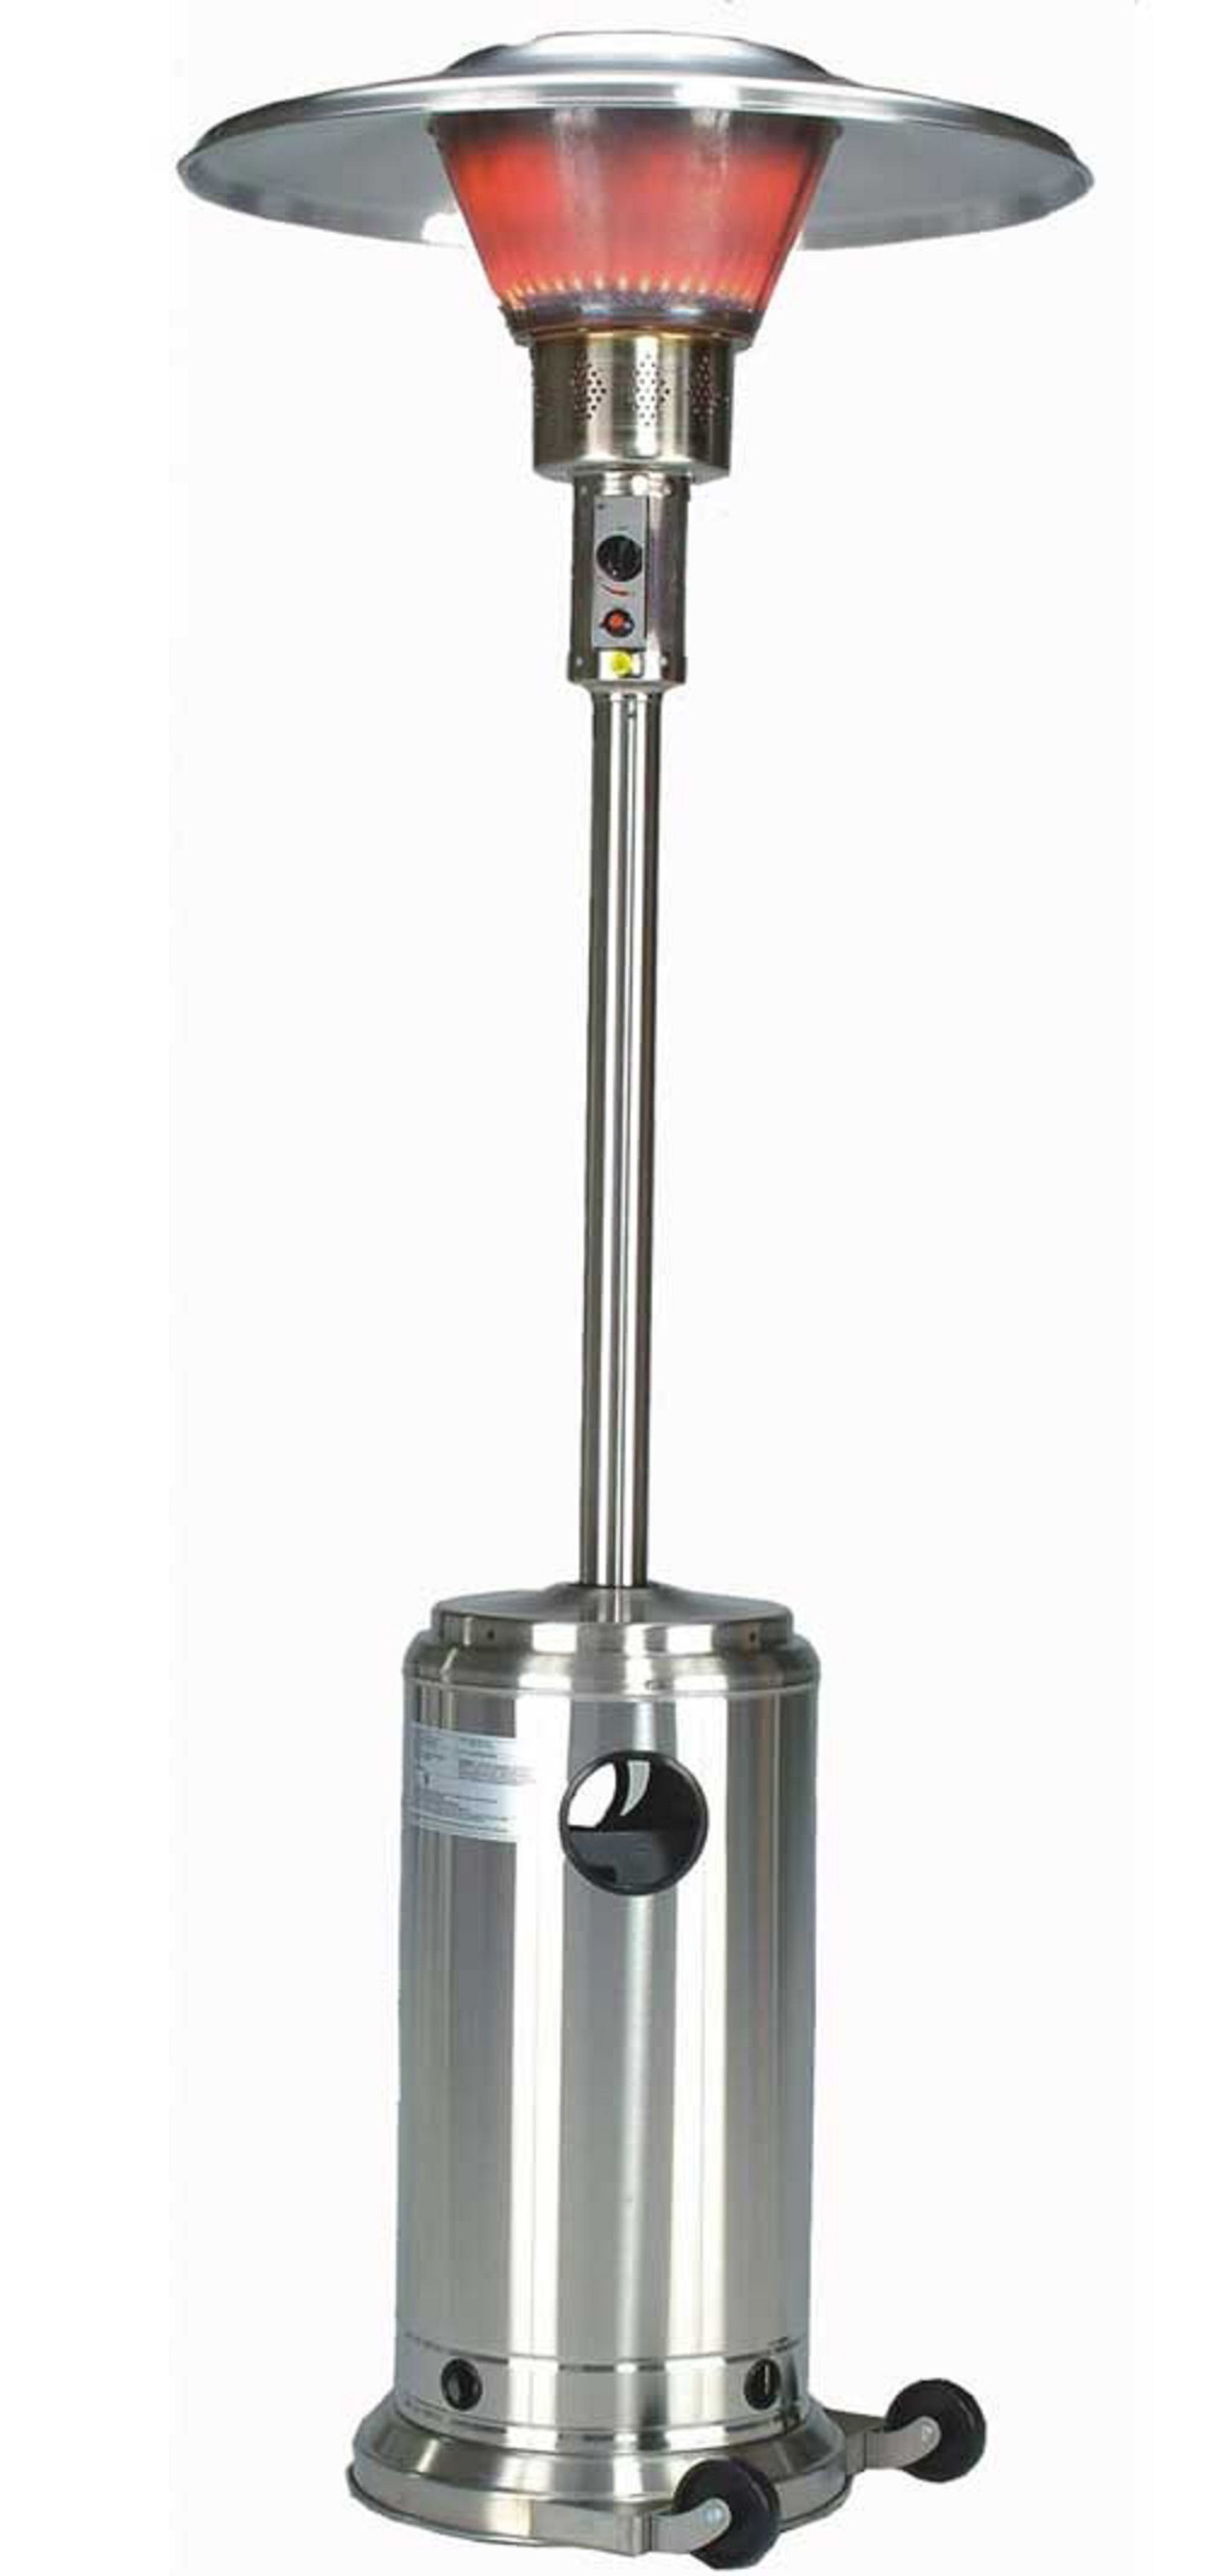 AZ Patio Heaters BURN-2650-SS 90 in. Tall Commercial Patio Heater, Stainless Steel